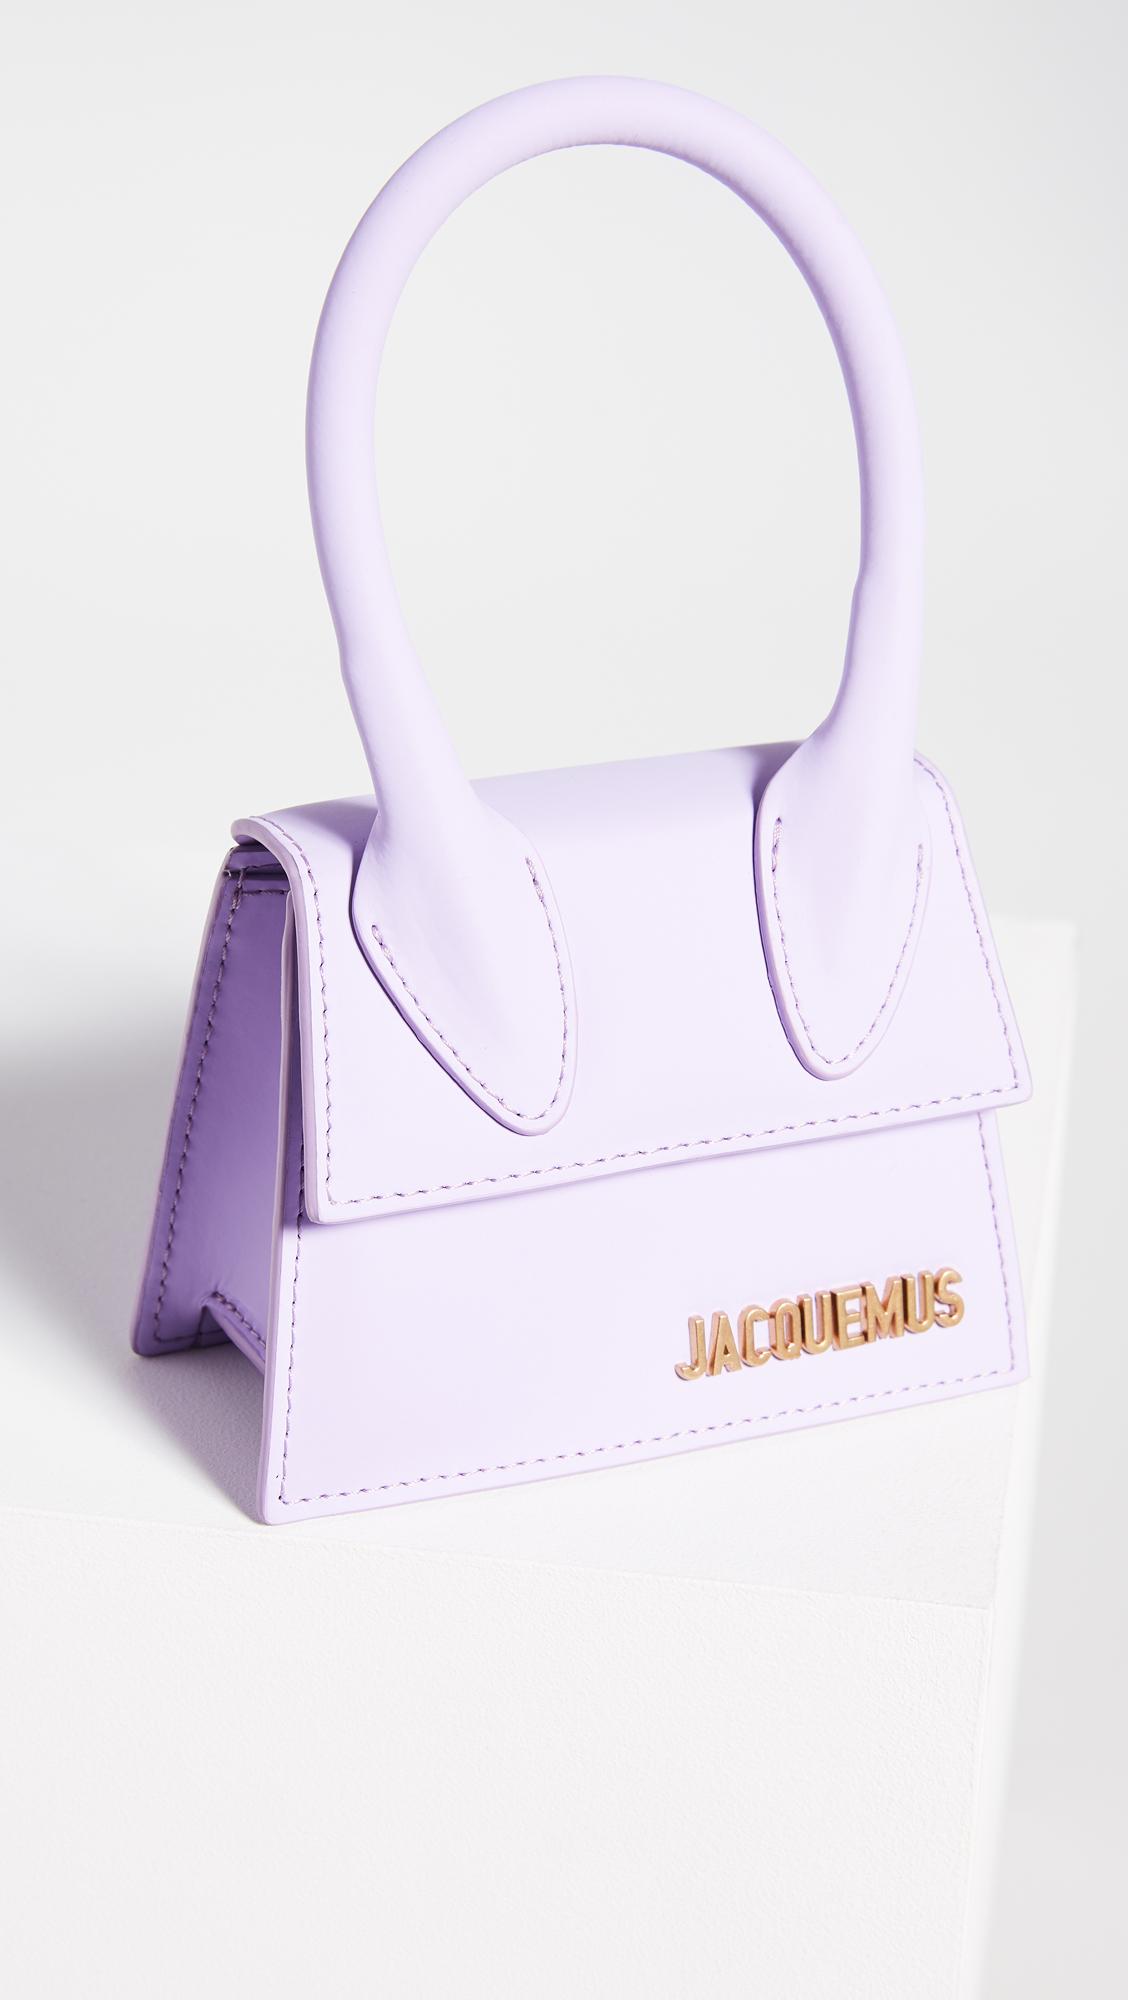 Jacquemus Leather Le Chiquito Bag in Lilac (Purple) - Lyst